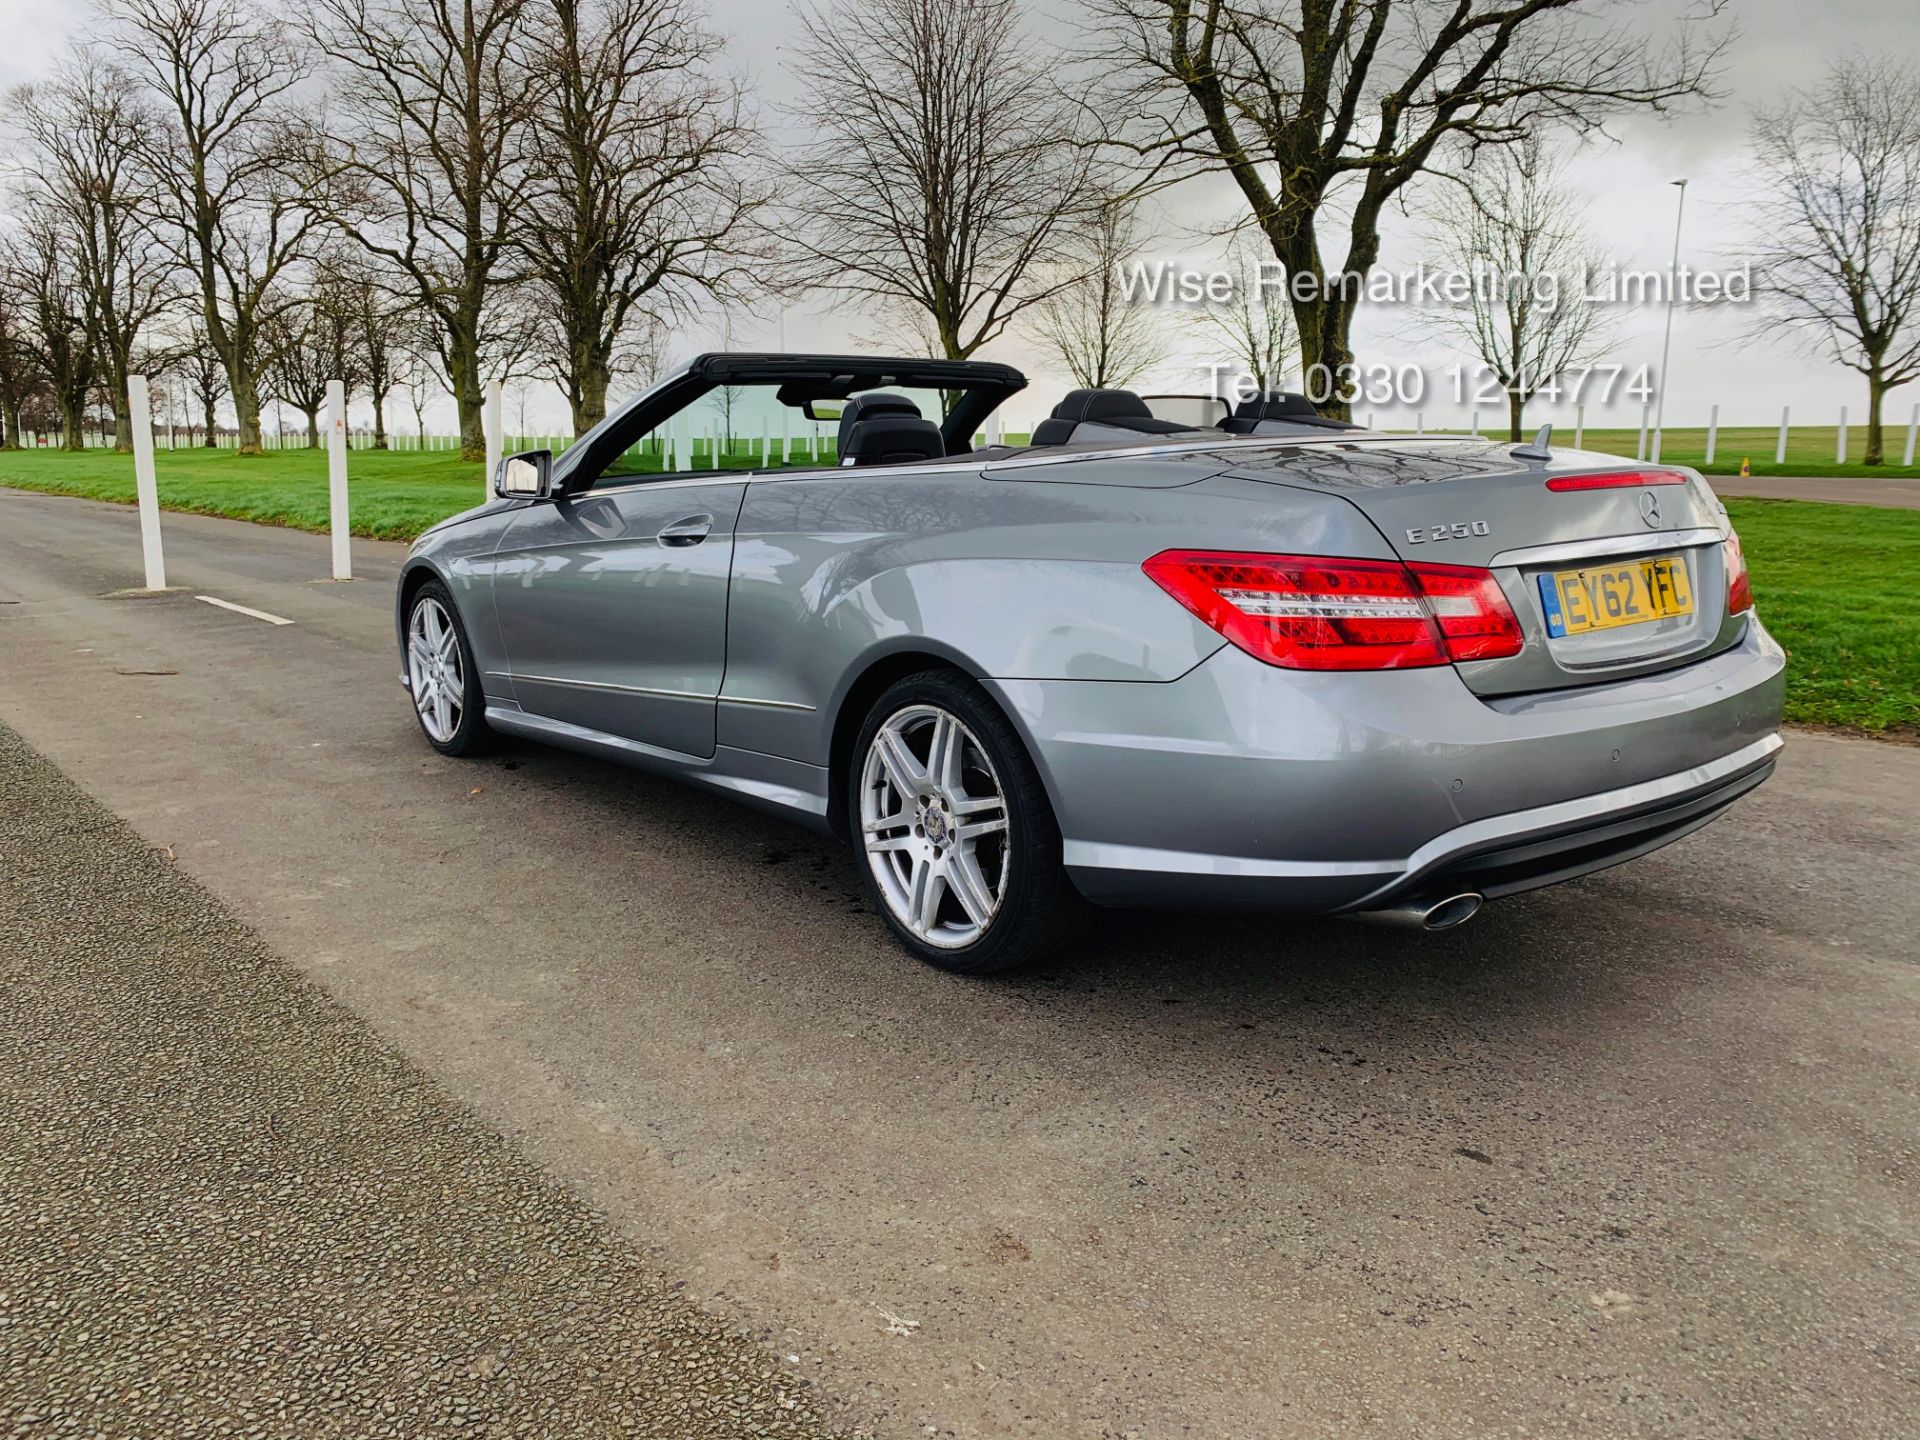 Mercedes E250 CDI Convertible Sport Tip Auto - 2013 Model - Service History - Leather - Parking aid - Image 11 of 27